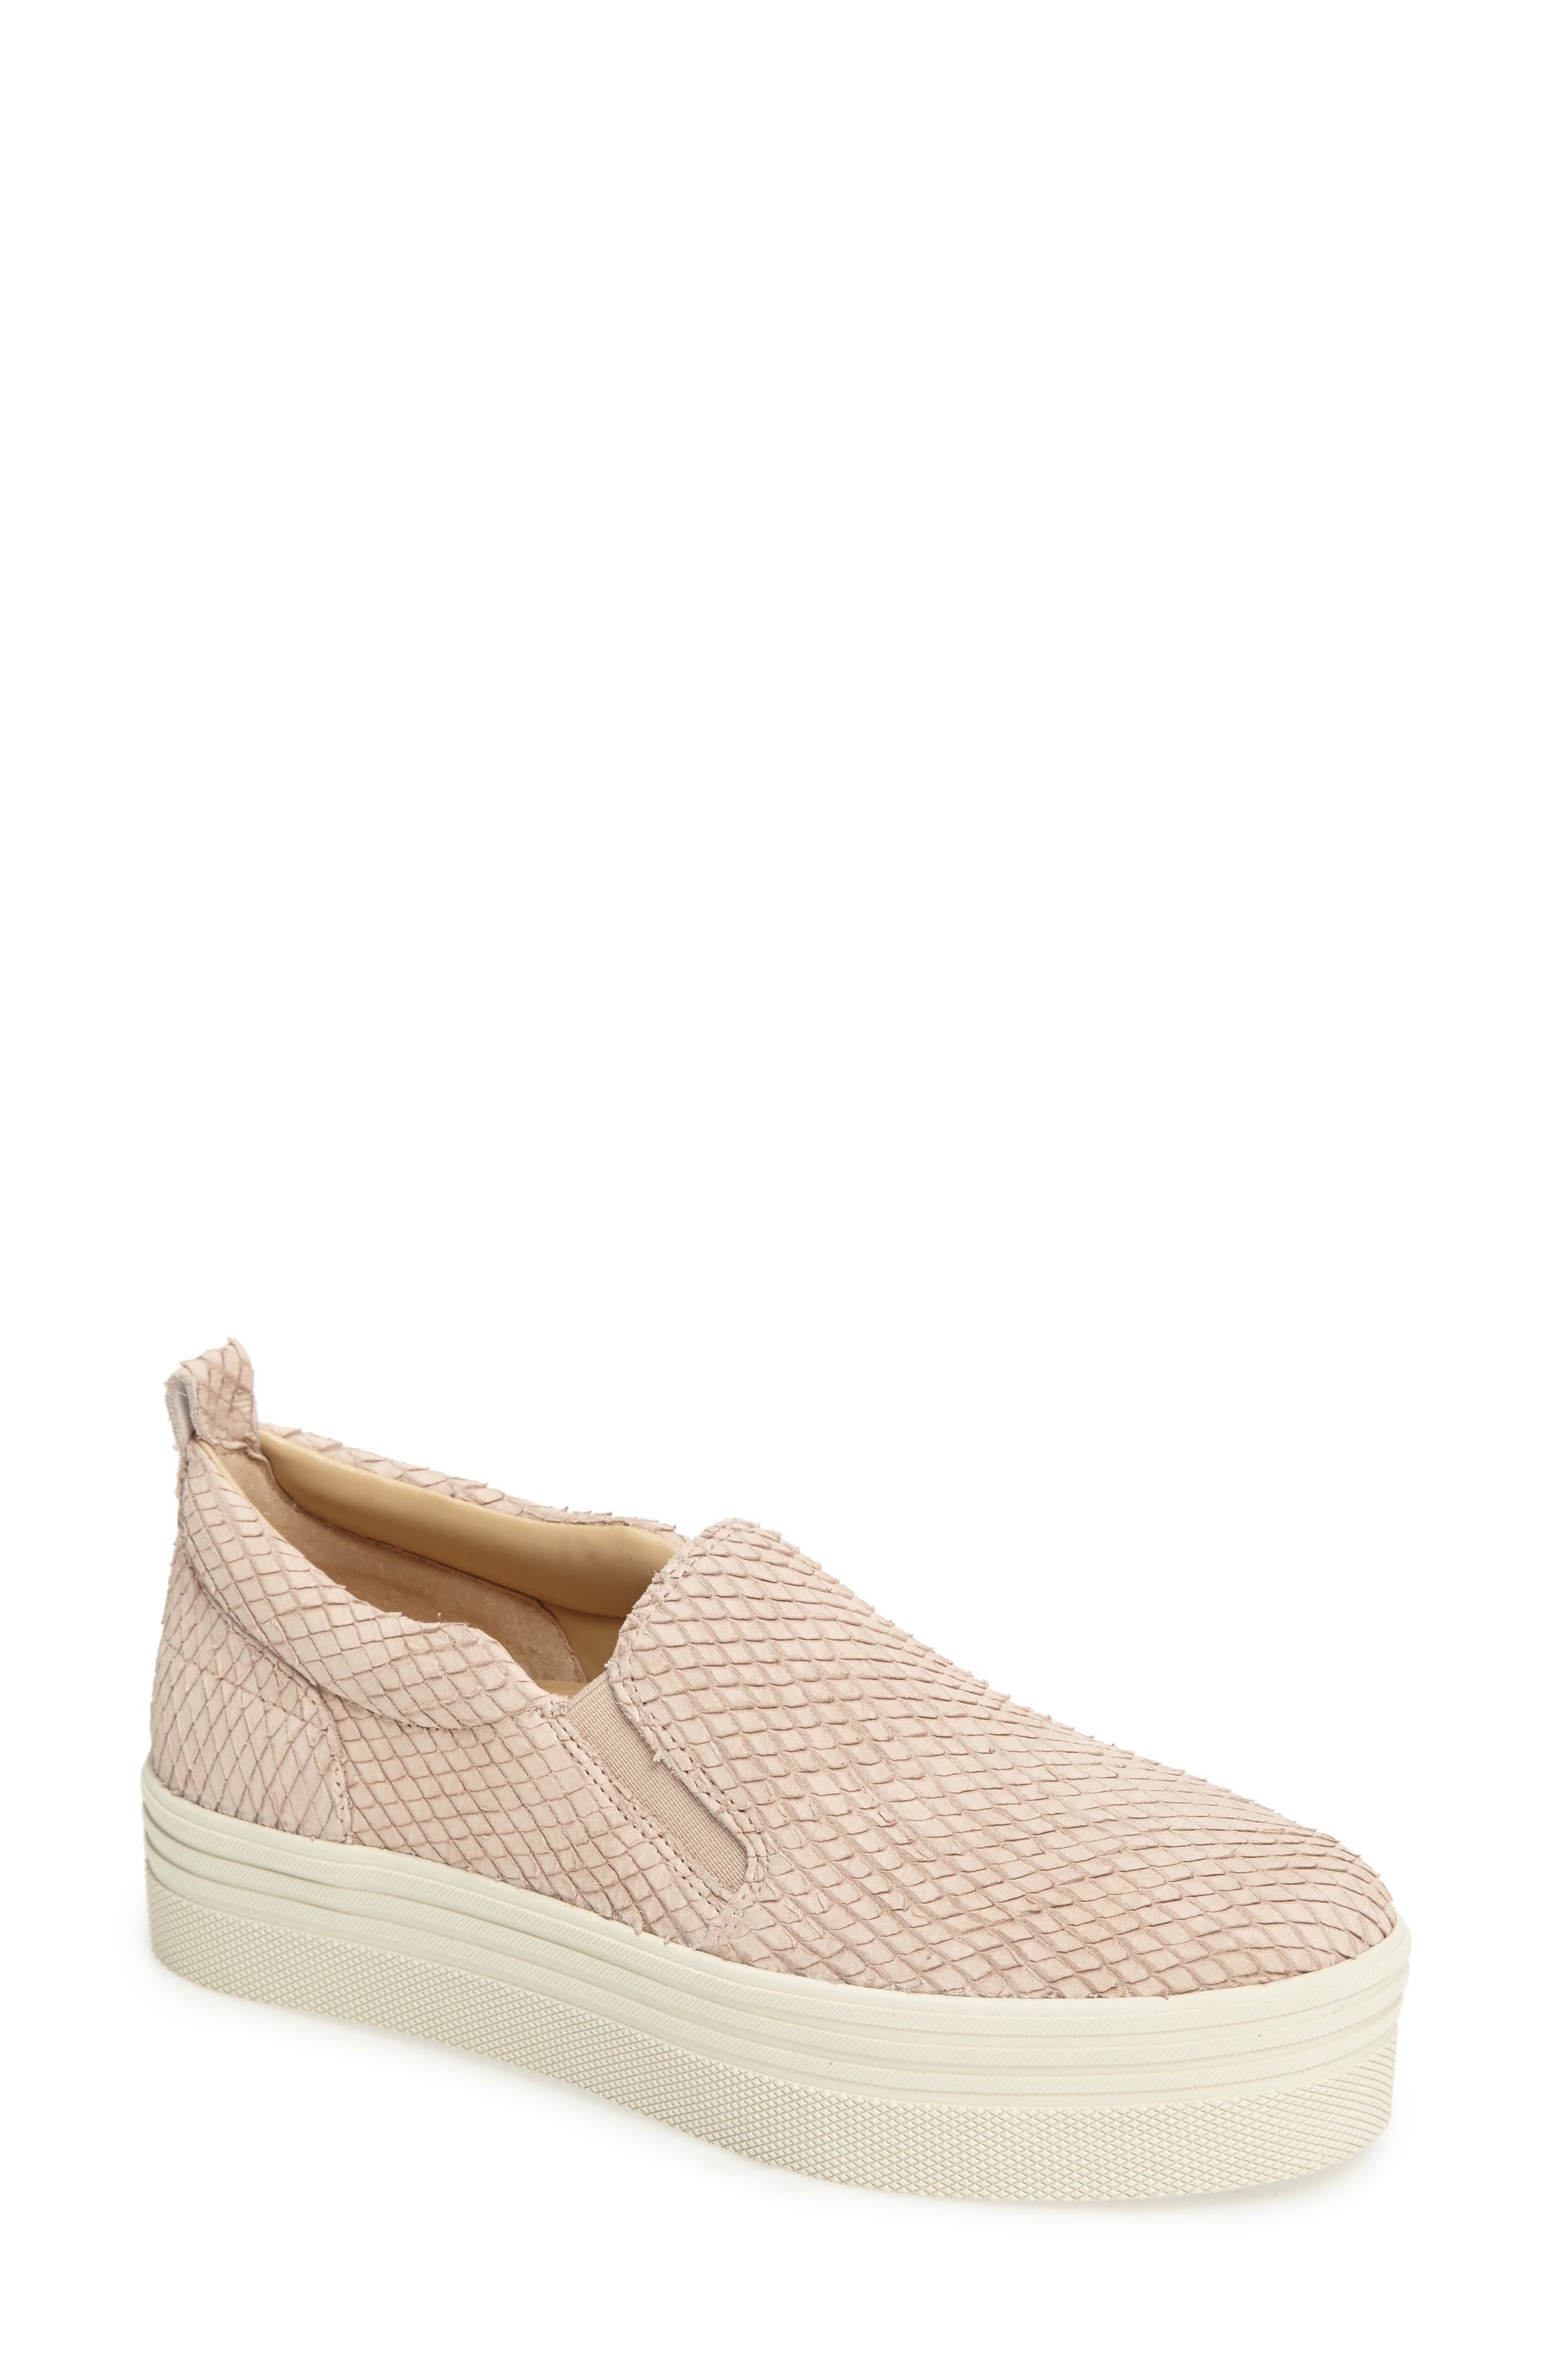 marc fisher slip on sneakers